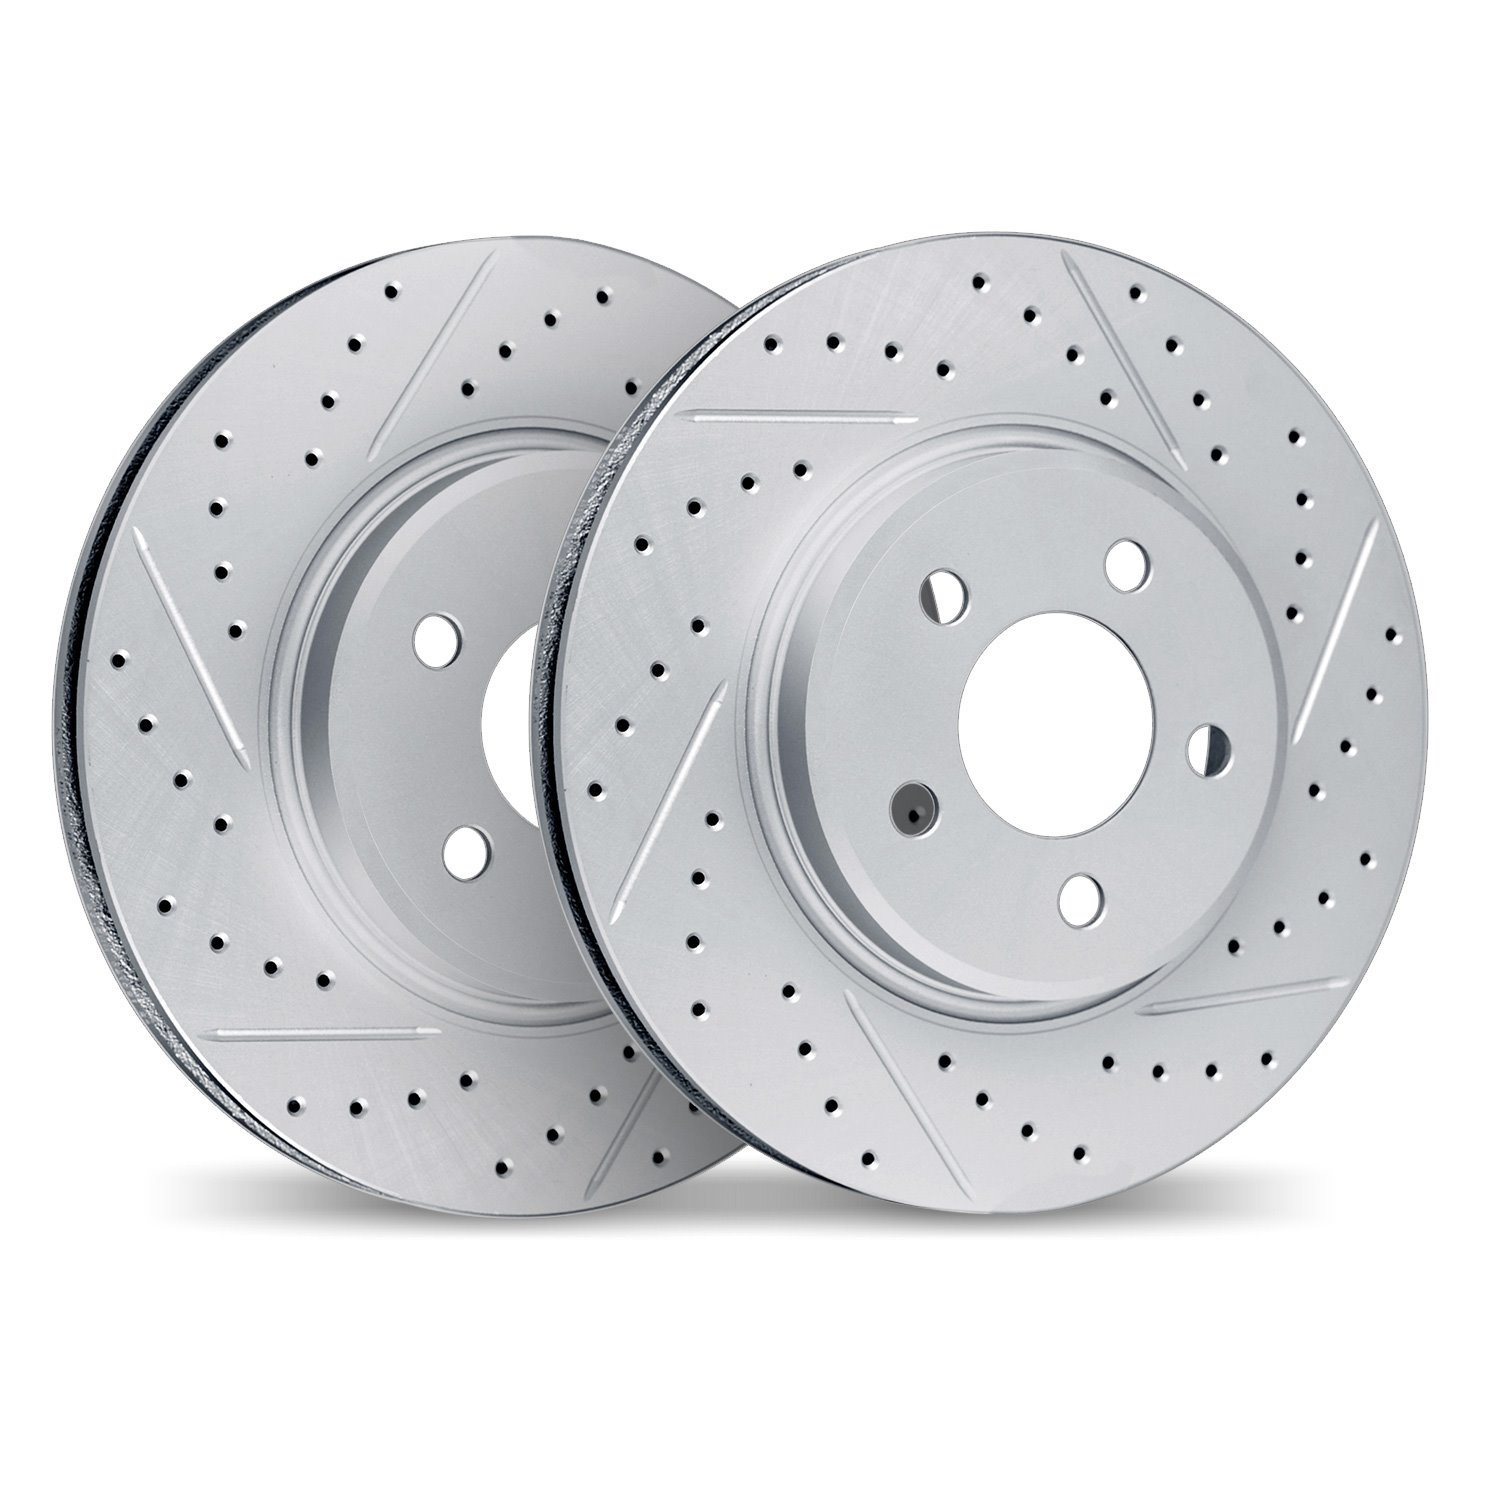 2002-54105 Geoperformance Drilled/Slotted Brake Rotors, 1998-2002 Ford/Lincoln/Mercury/Mazda, Position: Front